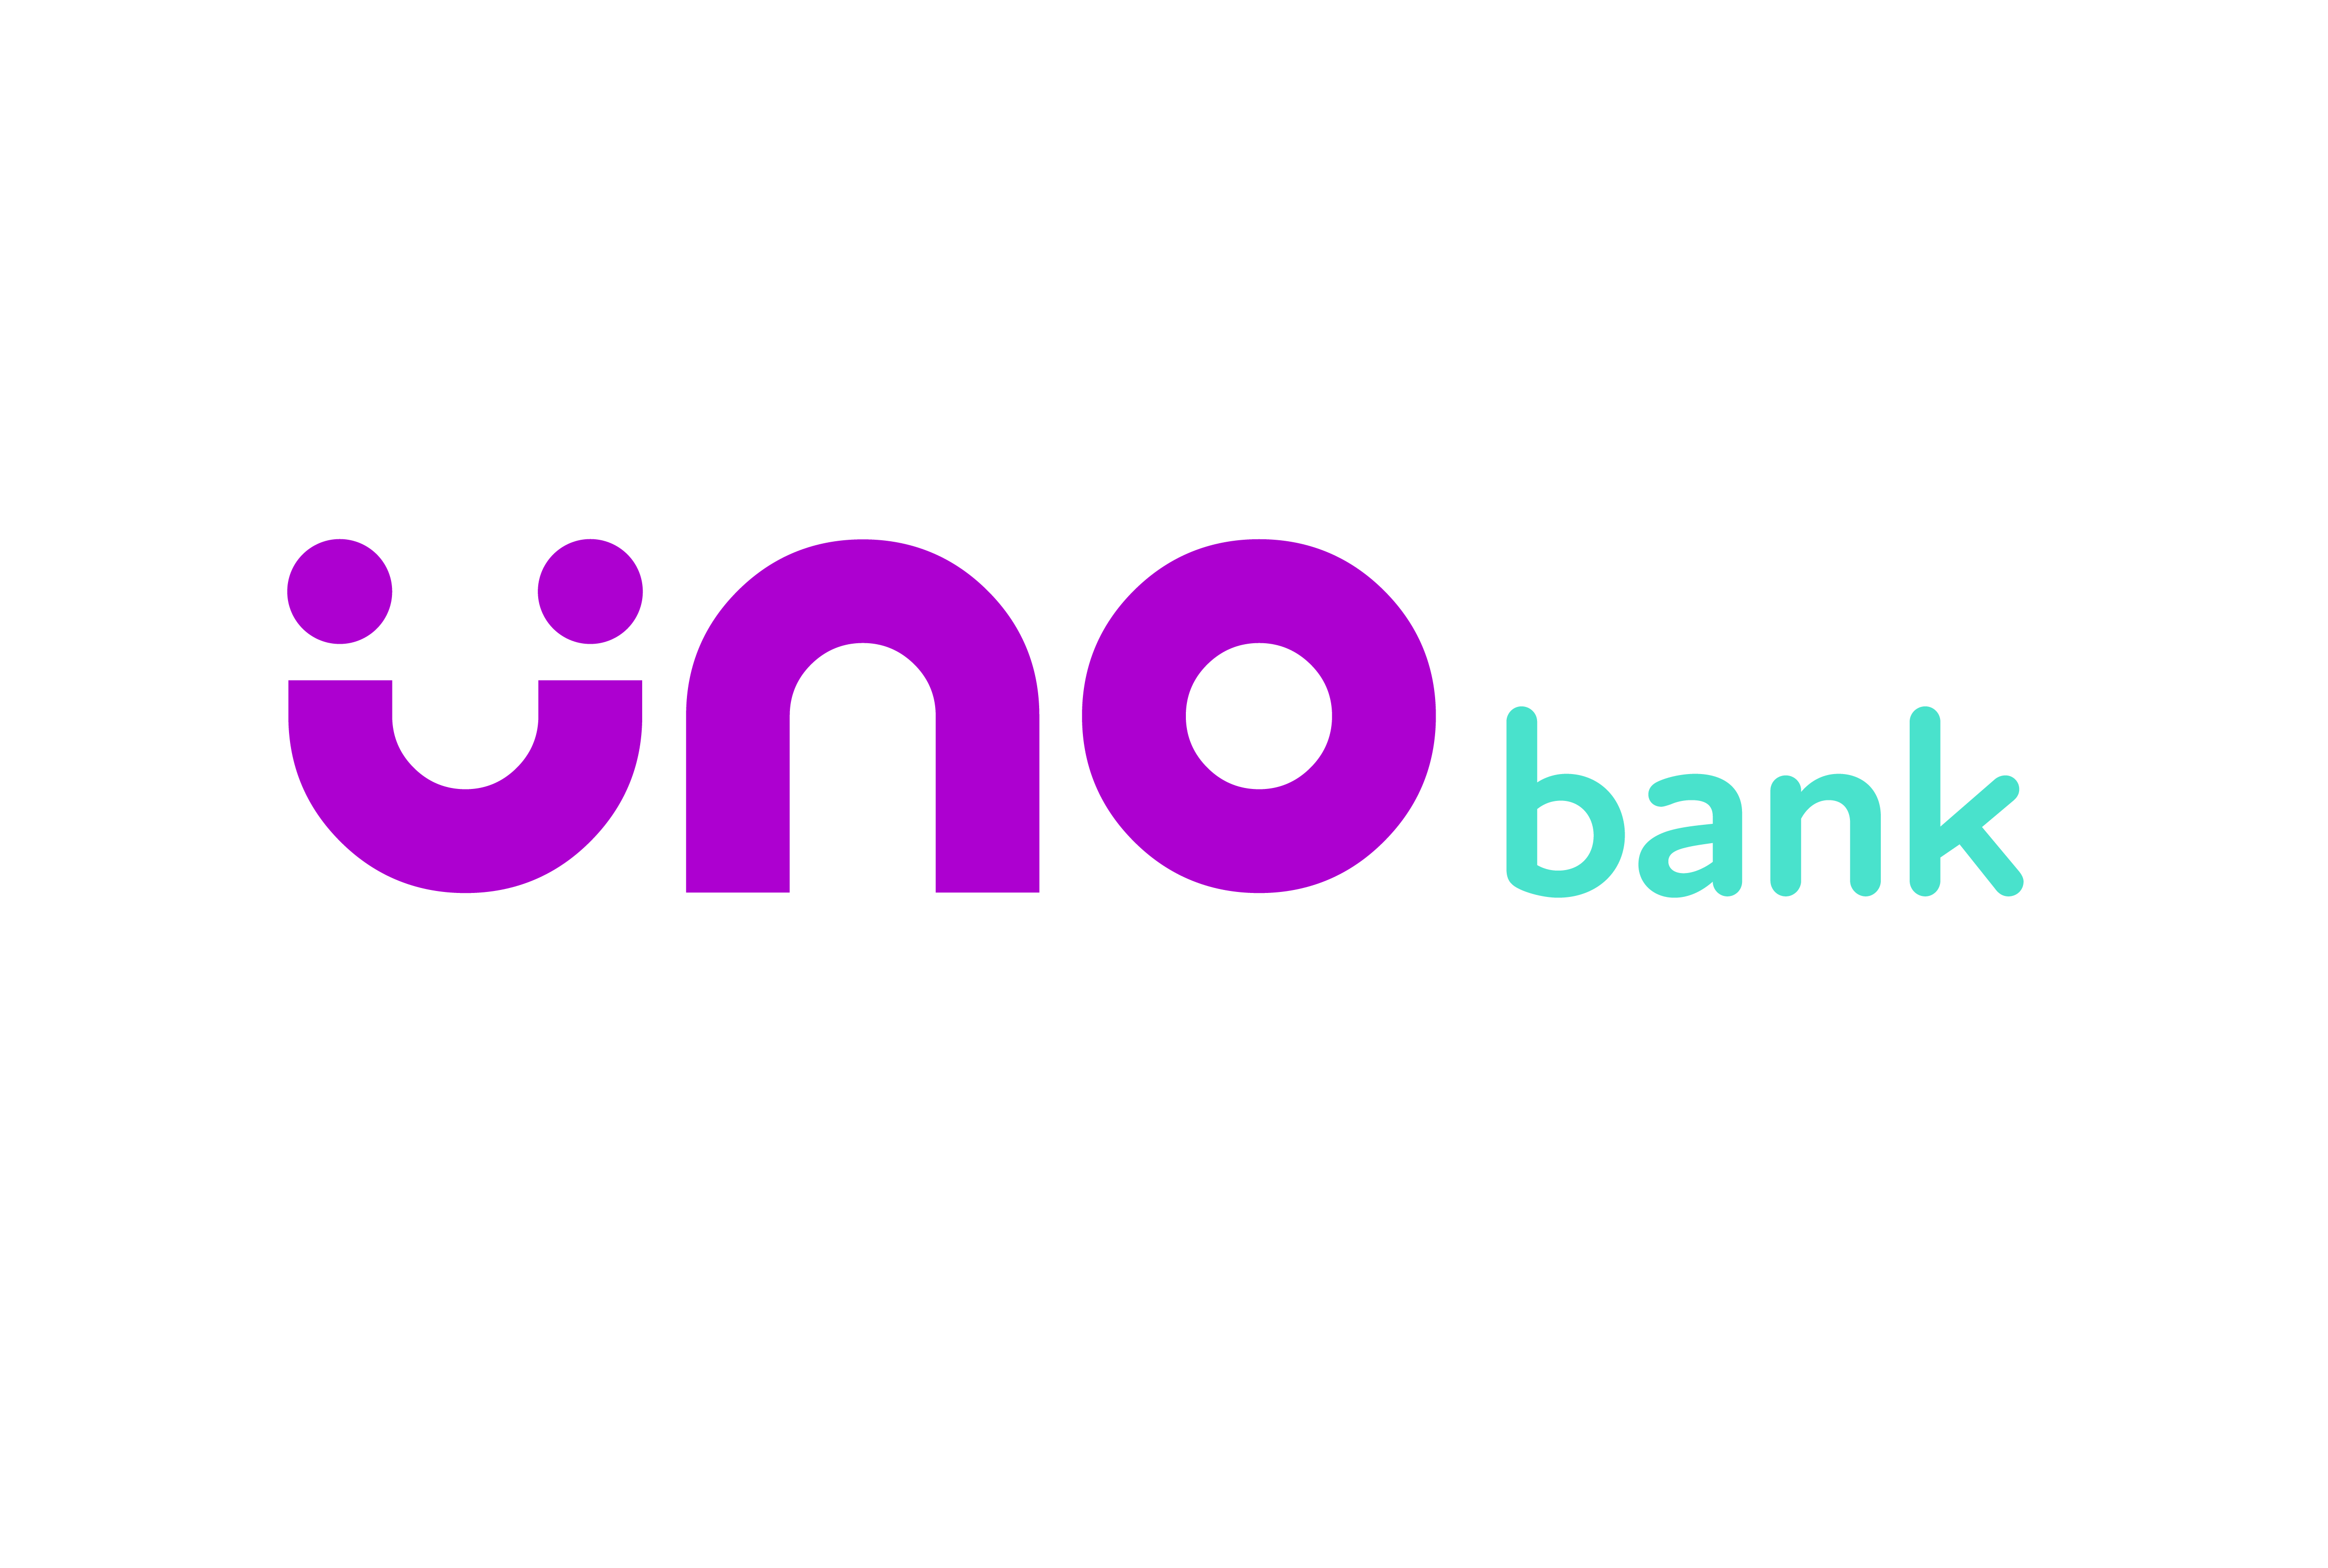 UNObank secures digital banking license in the Philippines